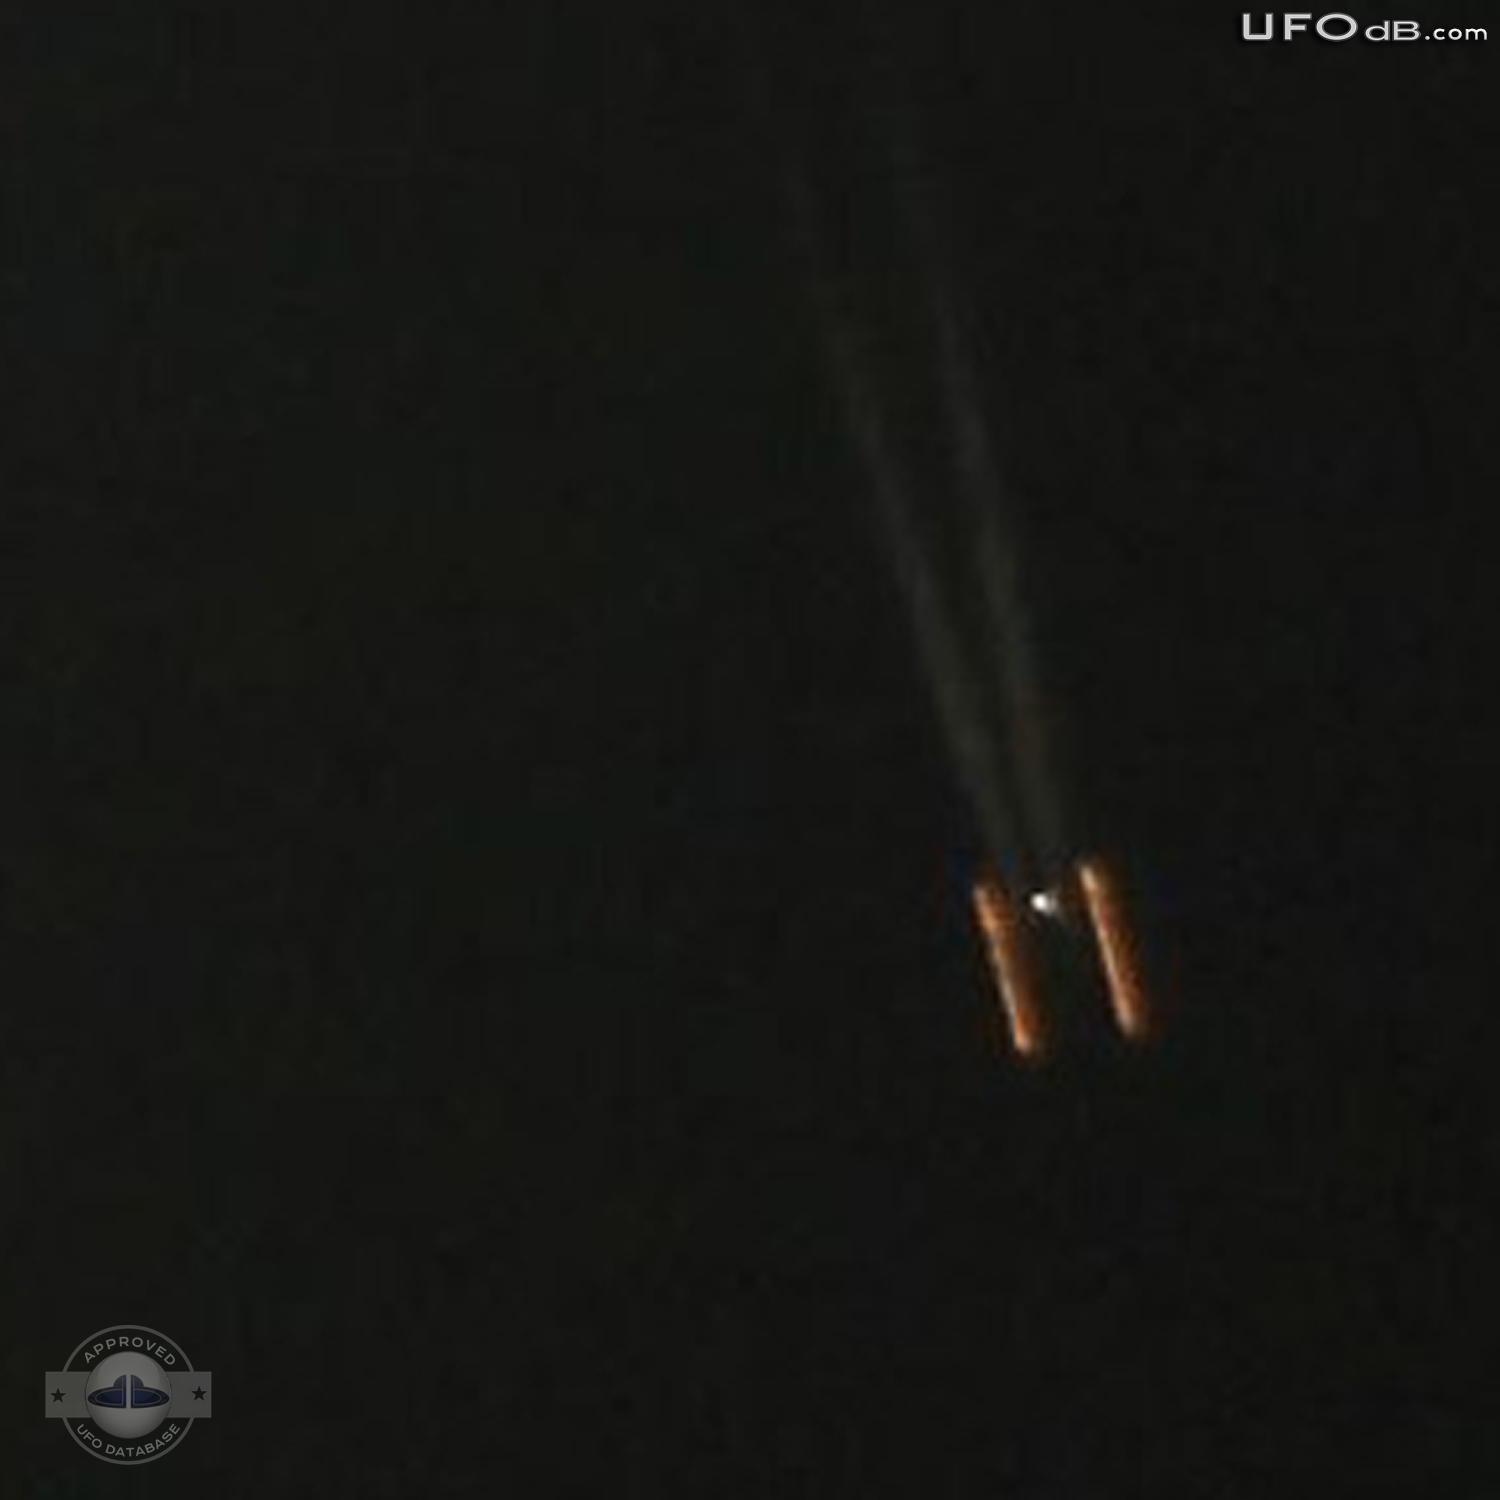 Moon picture captures a very strange shaped UFO | Louisiana USA 2011 UFO Picture #257-3